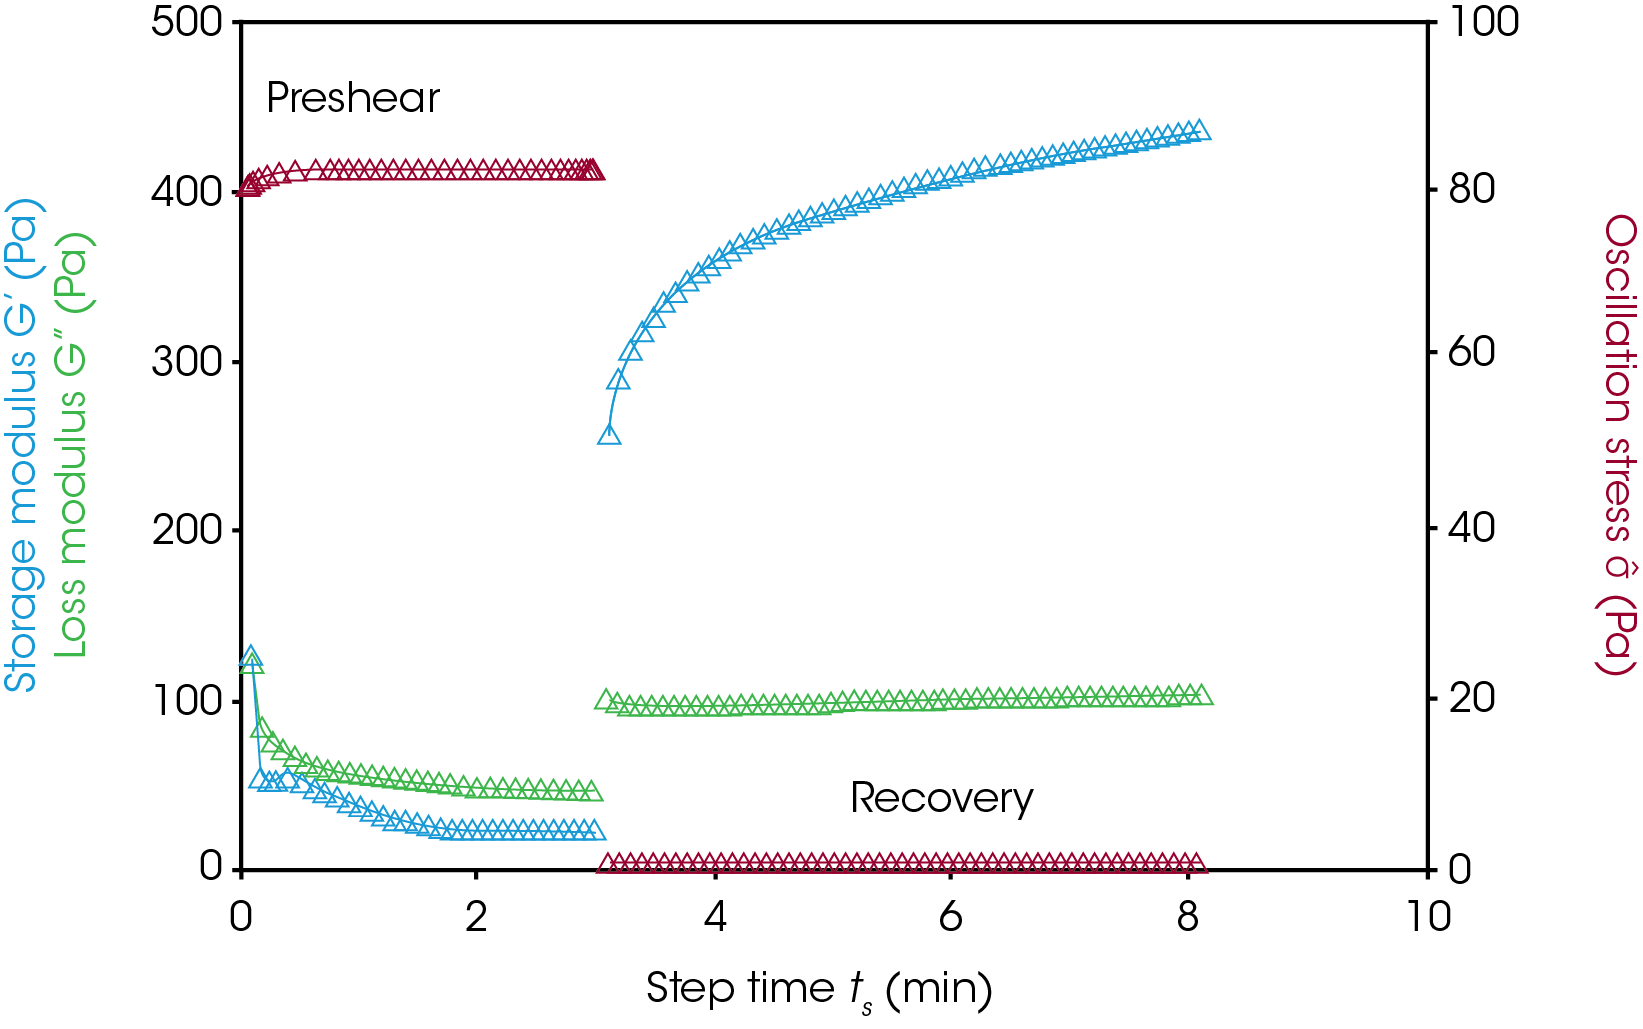 Figure 3. Oscillatory preshear and recovery of plain non-fat Greek yogurt. The storage modulus (blue) and loss modulus (green) are shown during and after preshear. The stress amplitude is shown in red.